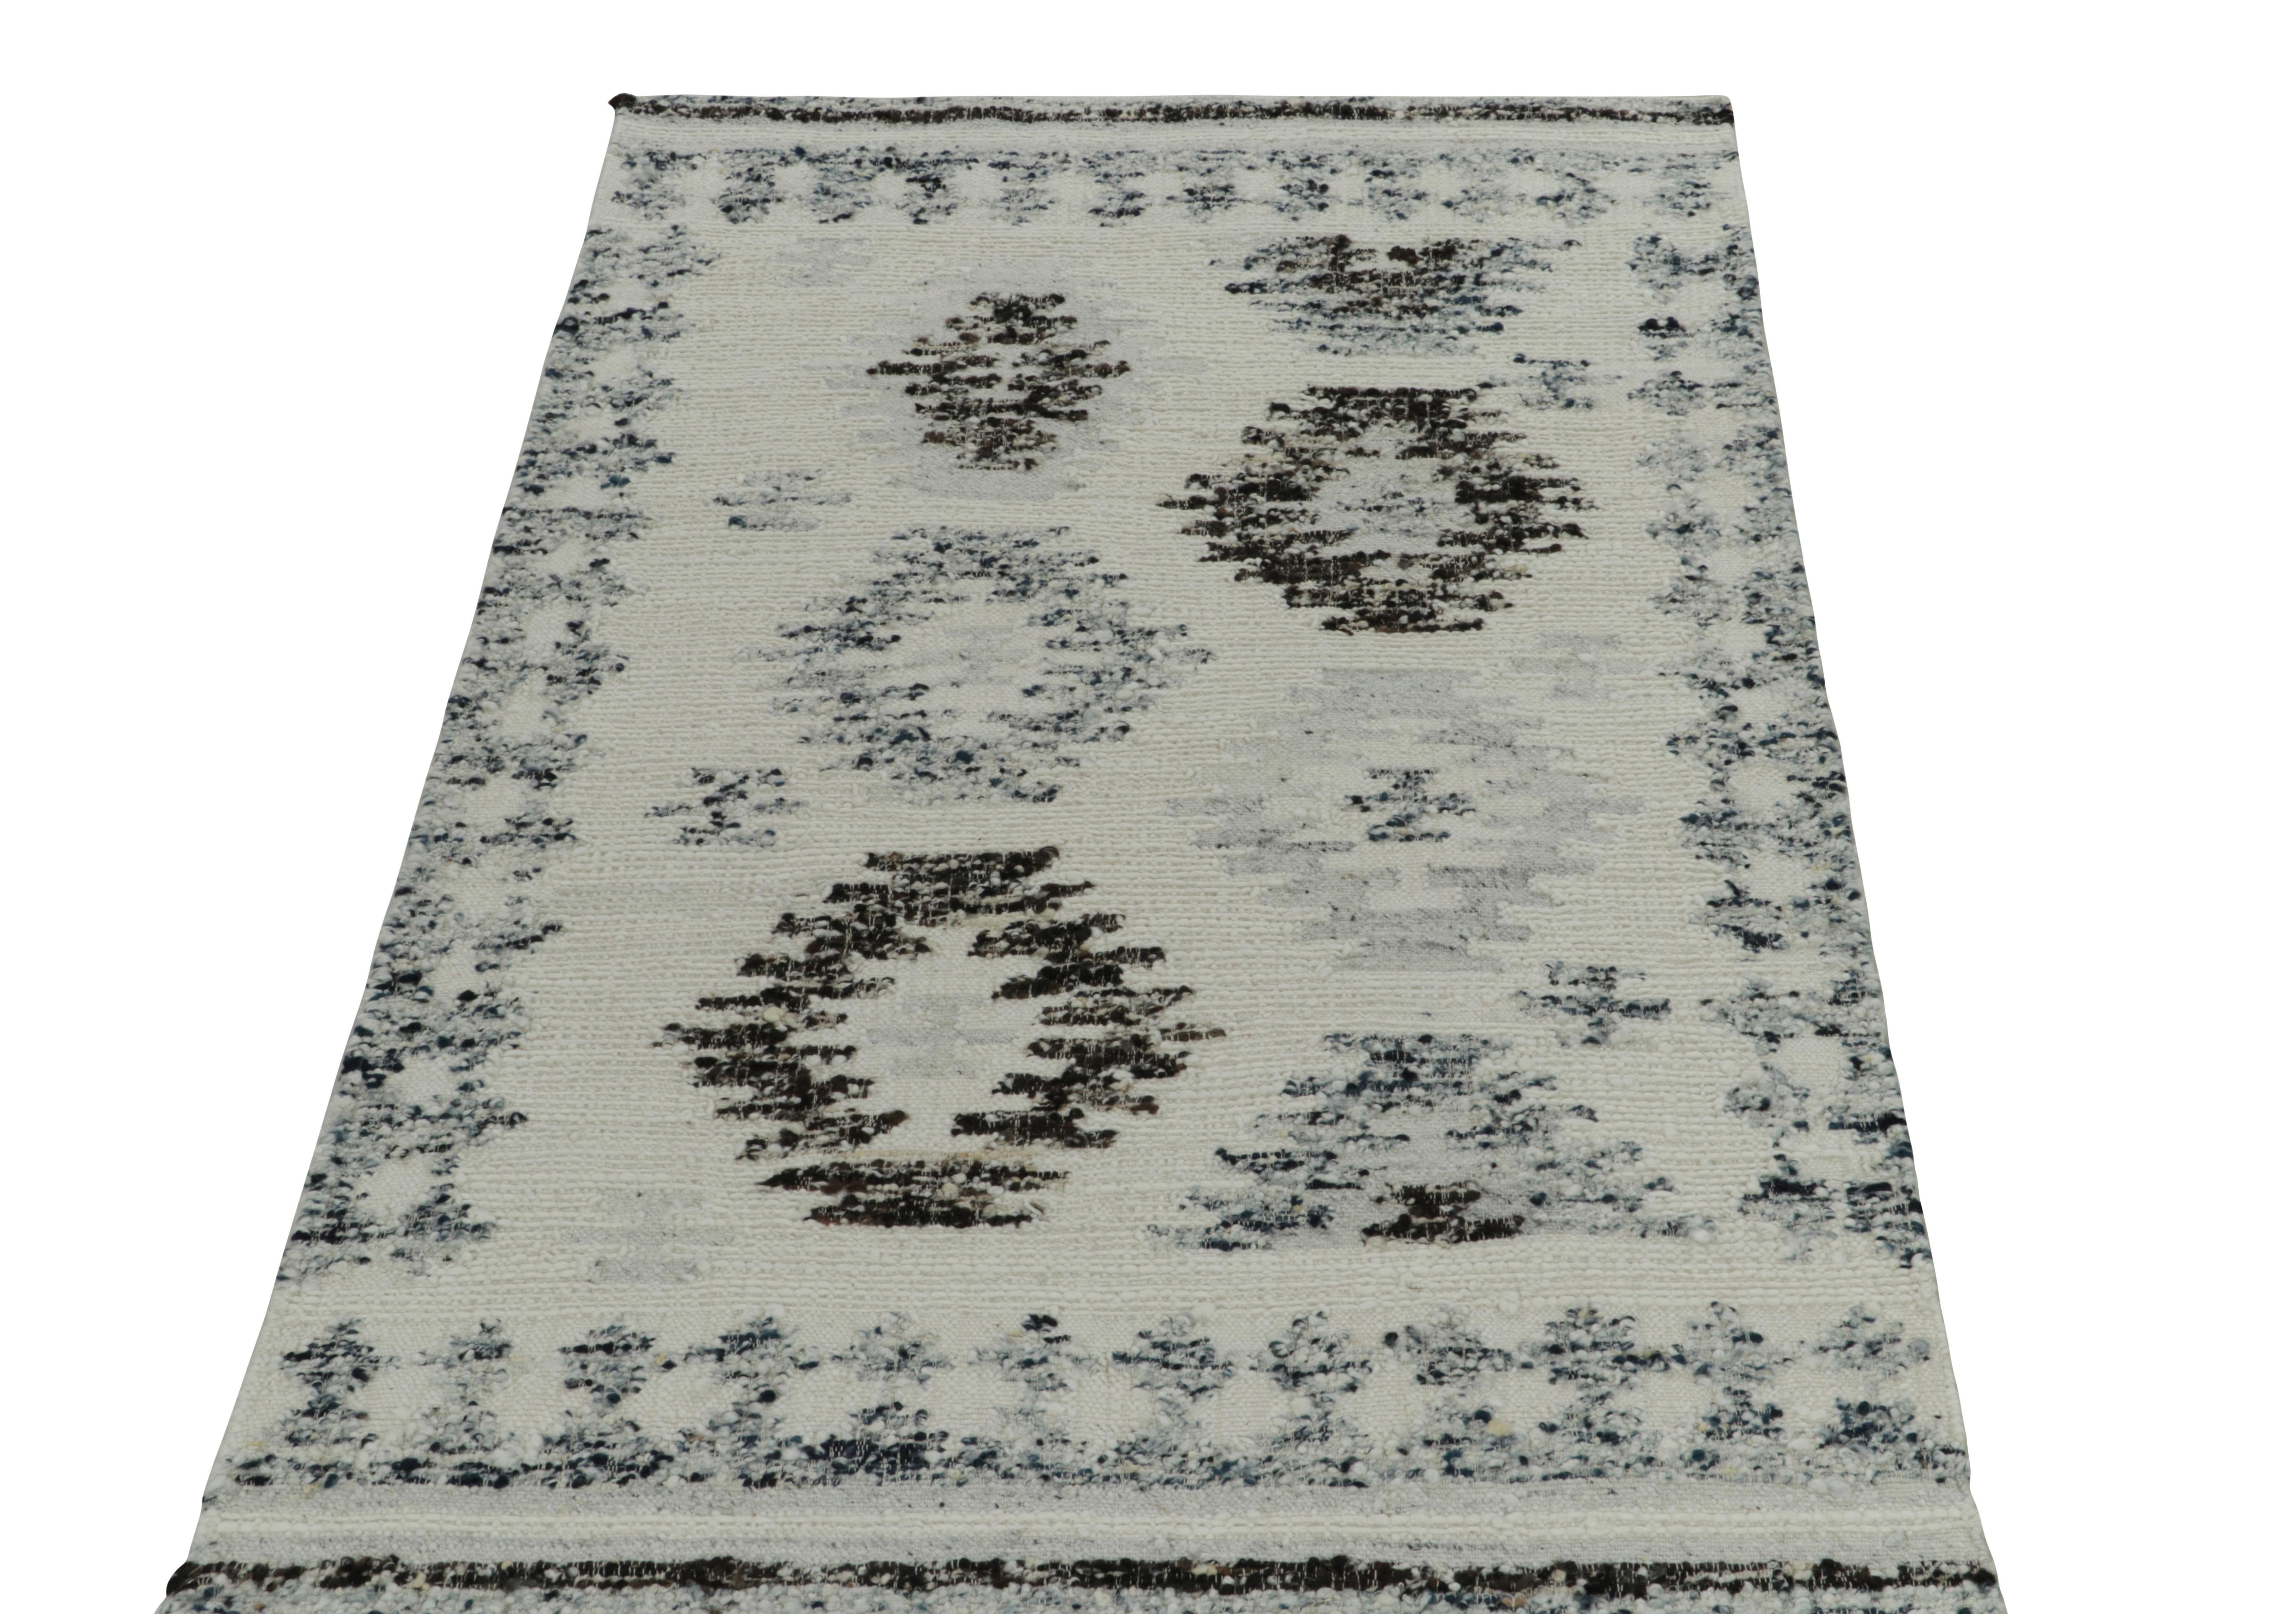 Rug & Kilim unveils an innovative 5x8 flat weave rug, exploring a bold play of classic geometry and modern texture. The Kilim rug enjoys an intriguing abstraction of tribal geometric patterns in crisp white, brown & cool blue. Furthermore the